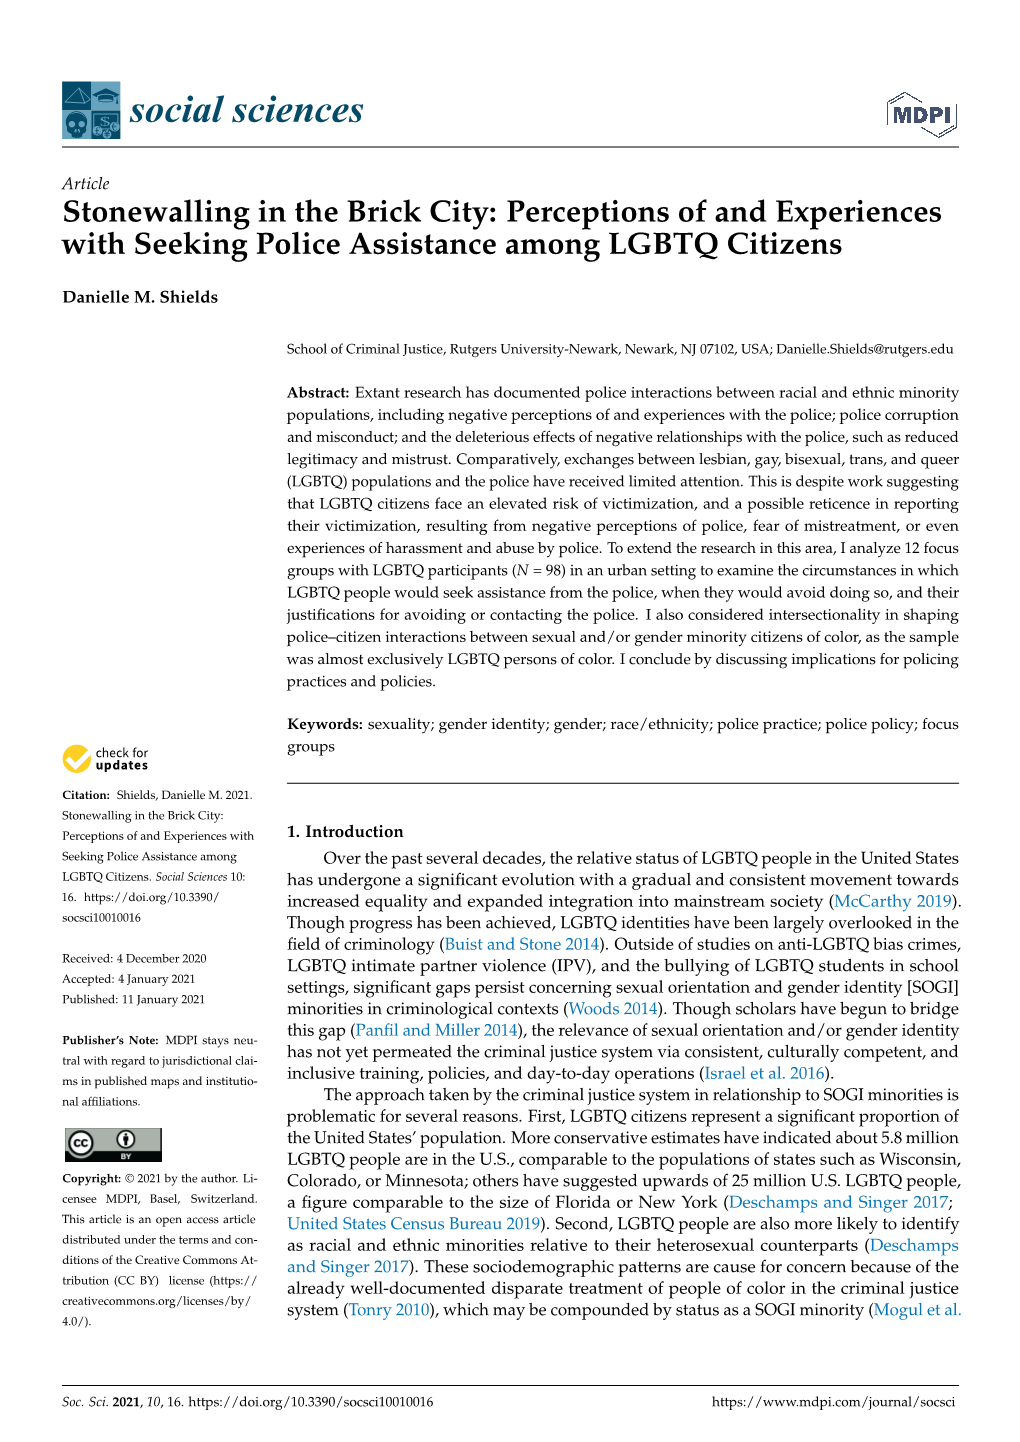 Perceptions of and Experiences with Seeking Police Assistance Among LGBTQ Citizens